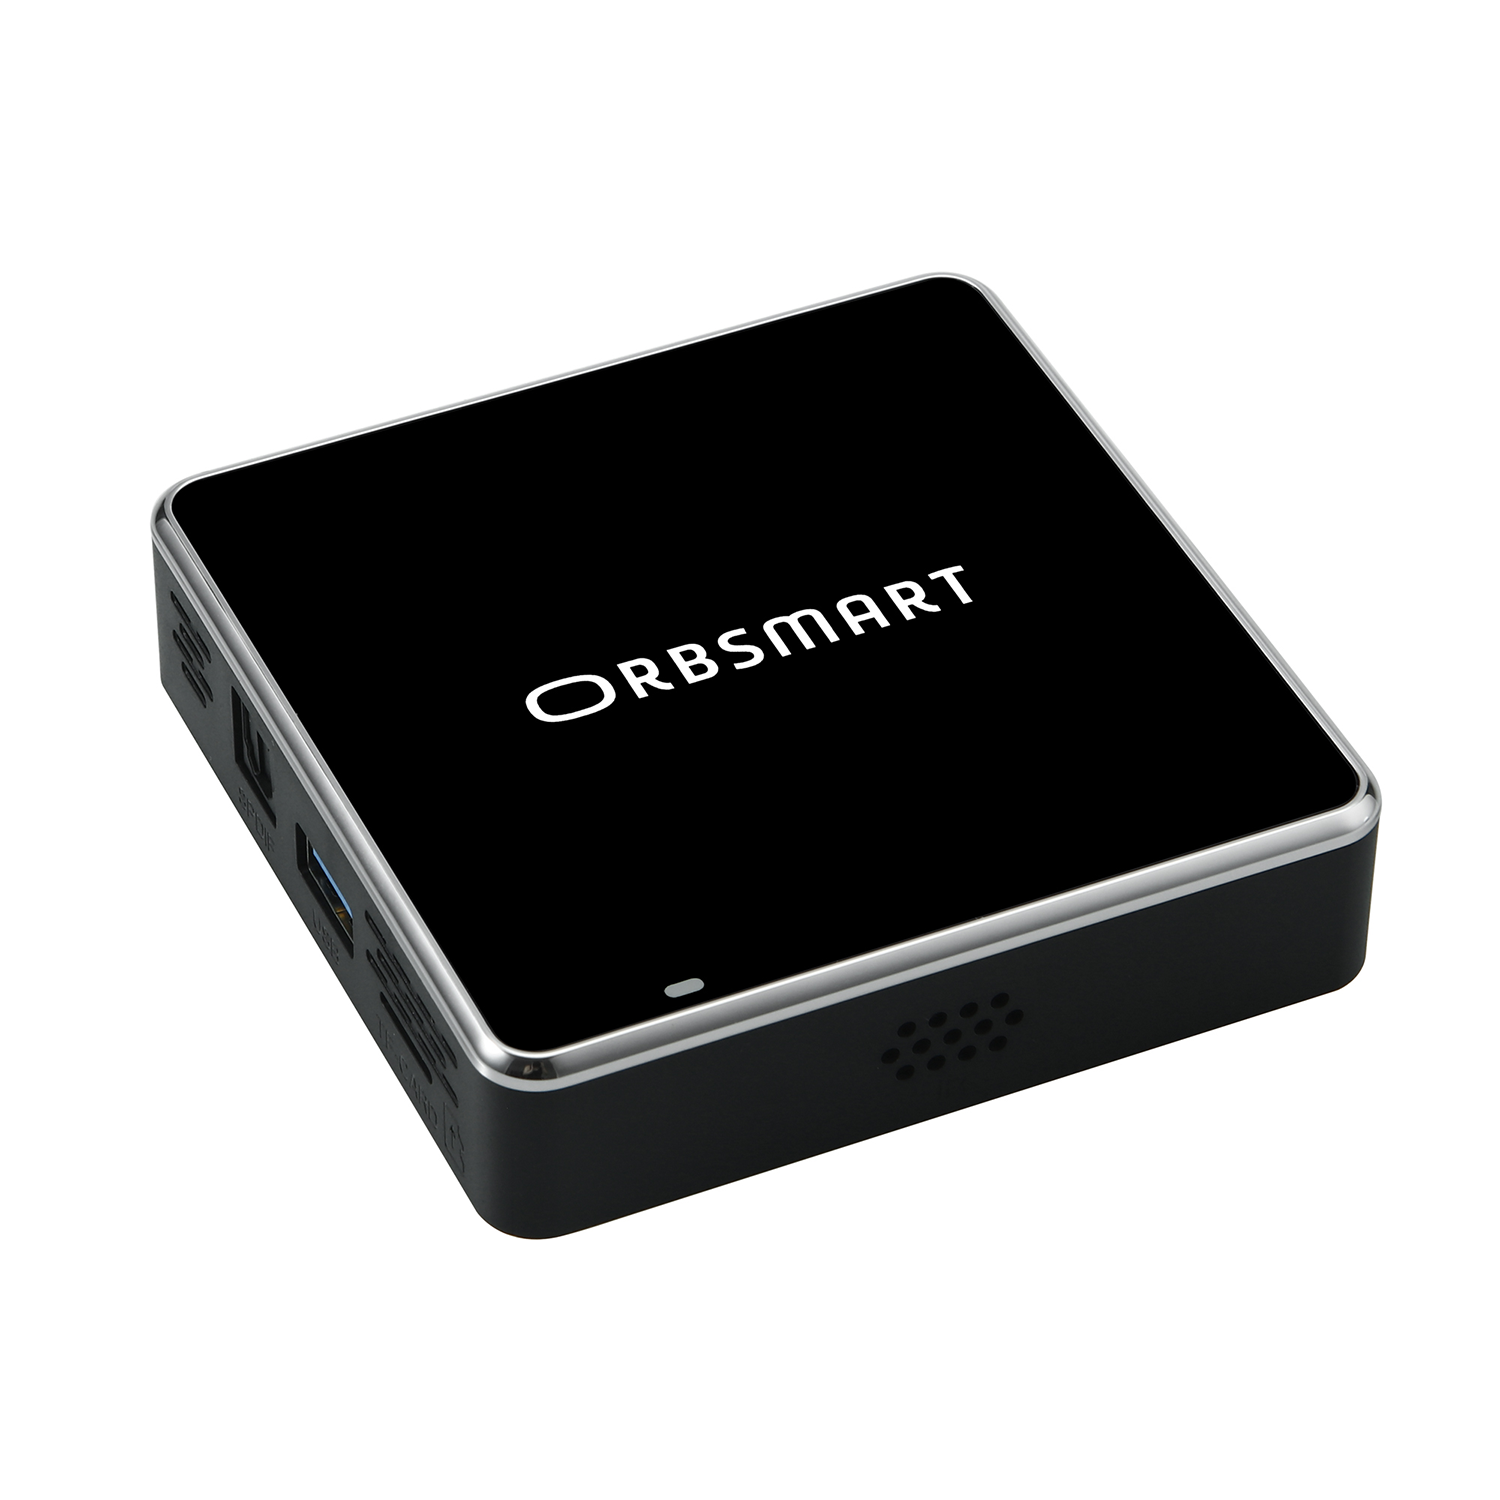 ORBSMART S87L Android TV DS 32 HDR GB 4K RAM, GB eMMC Player, PC, Mini Mali-G52 Box Android, 4